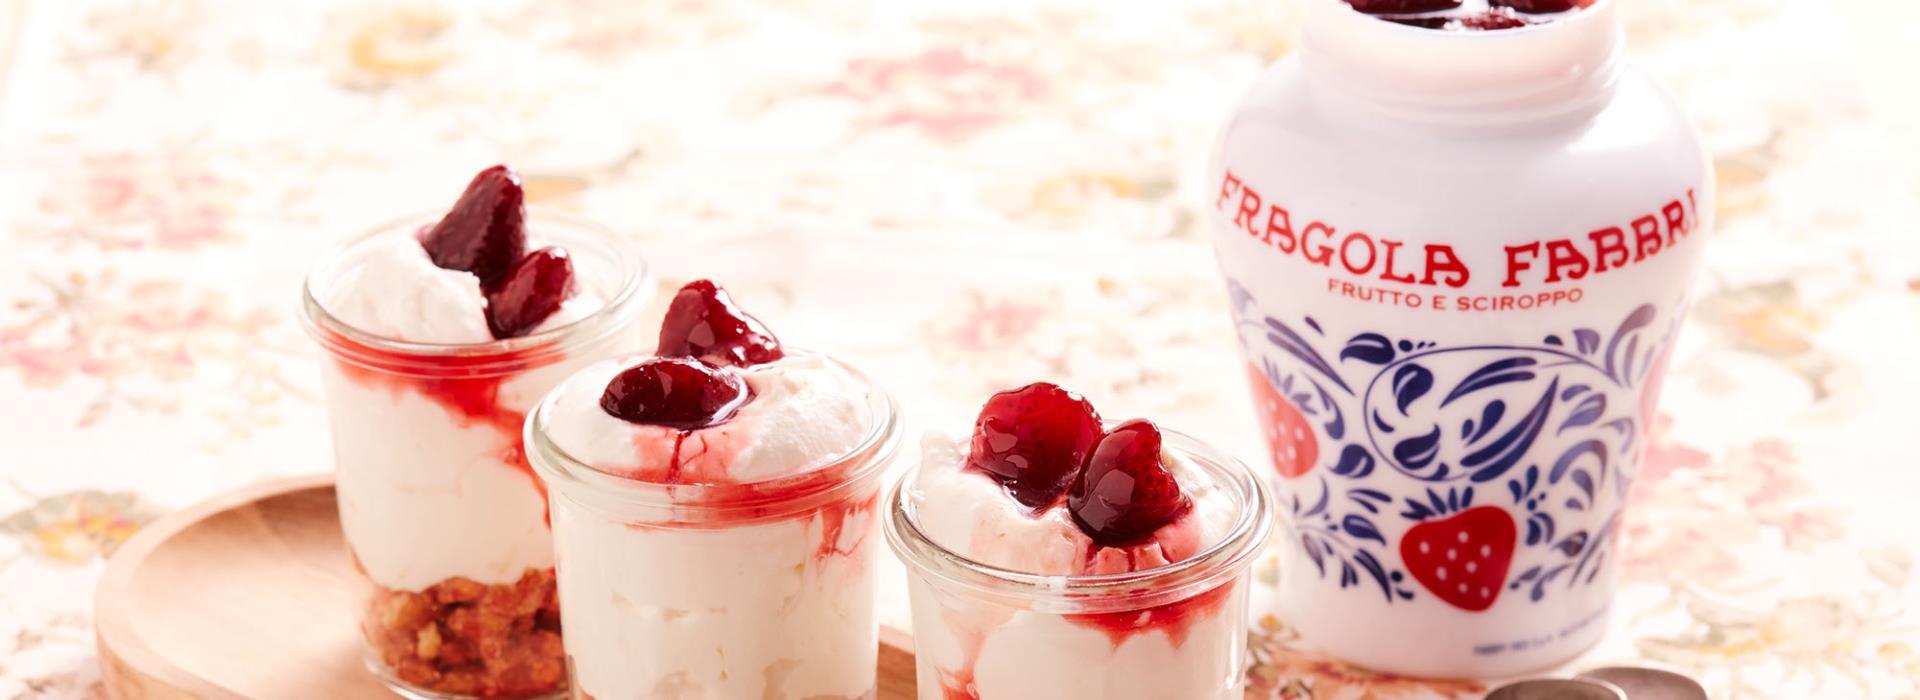 Can a single ingredient transform a recipe? We believe so. Try the mousse with ricotta and Fragola Fabbri.